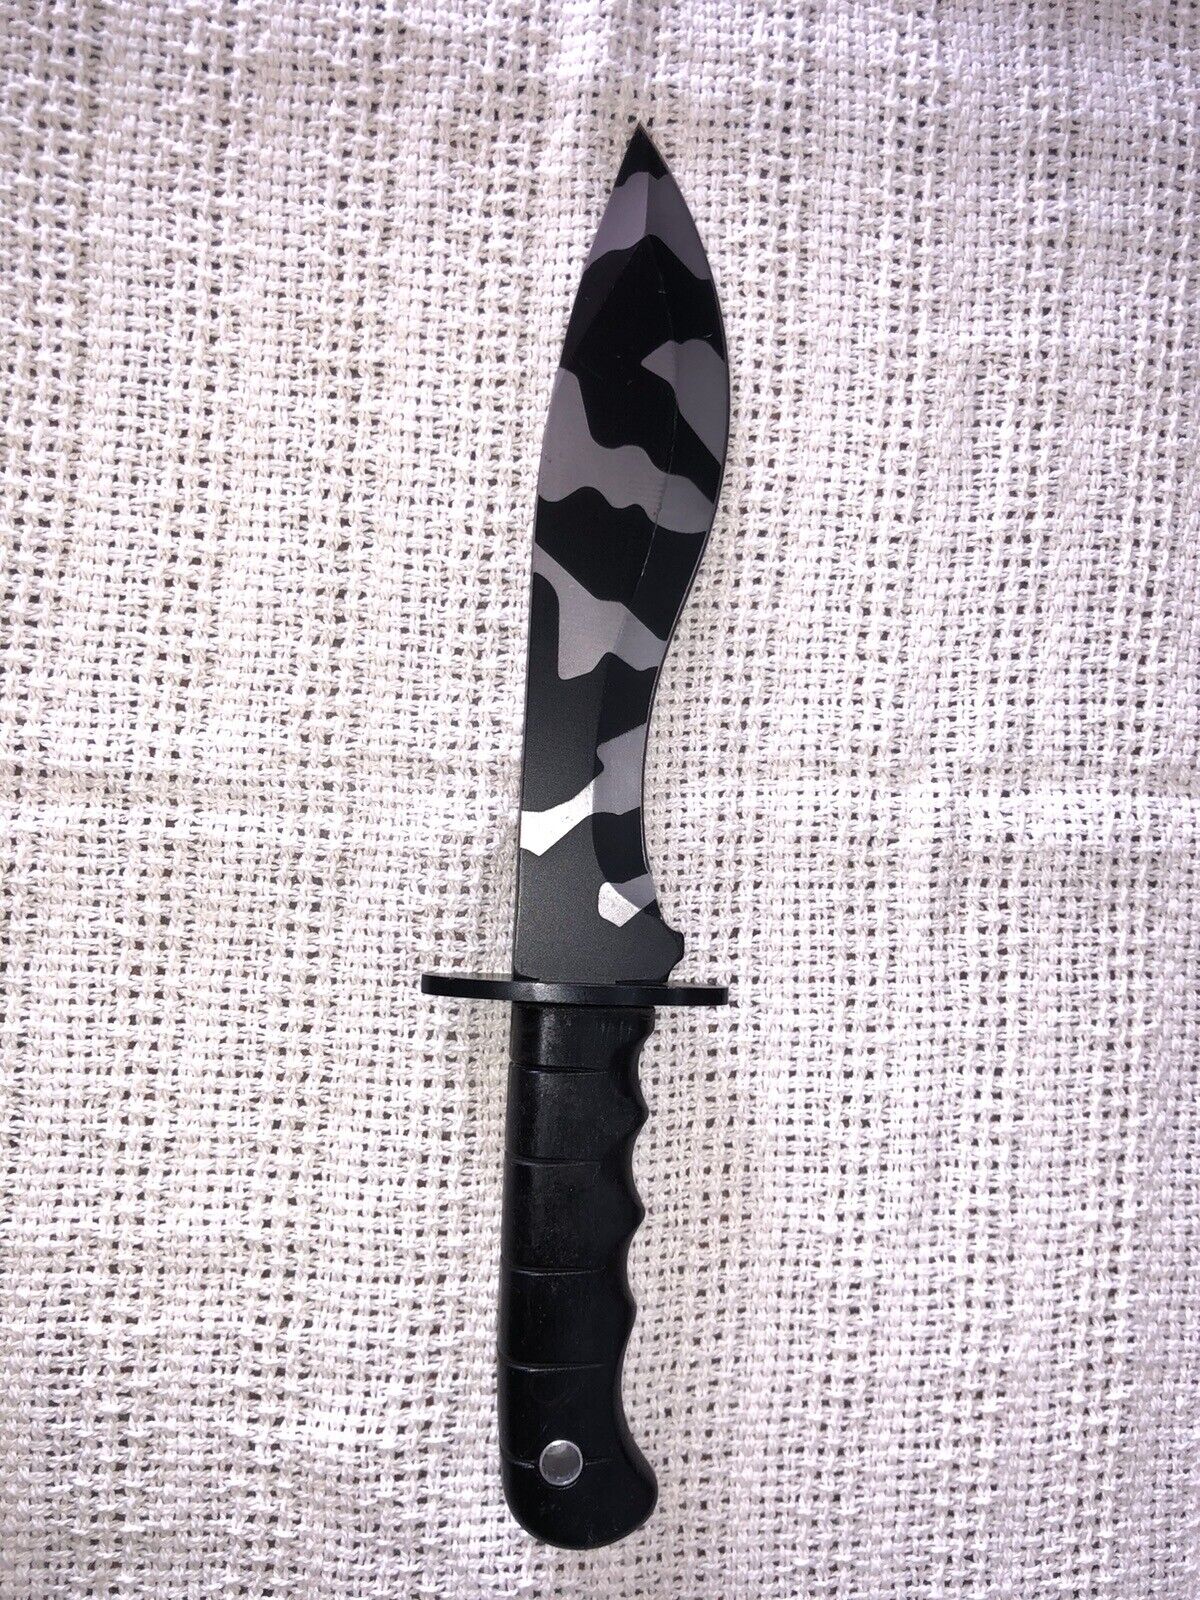 Hero’s Edge Fixed Blade Combat Knife With Sheath Rubber Handle And Camo Blade